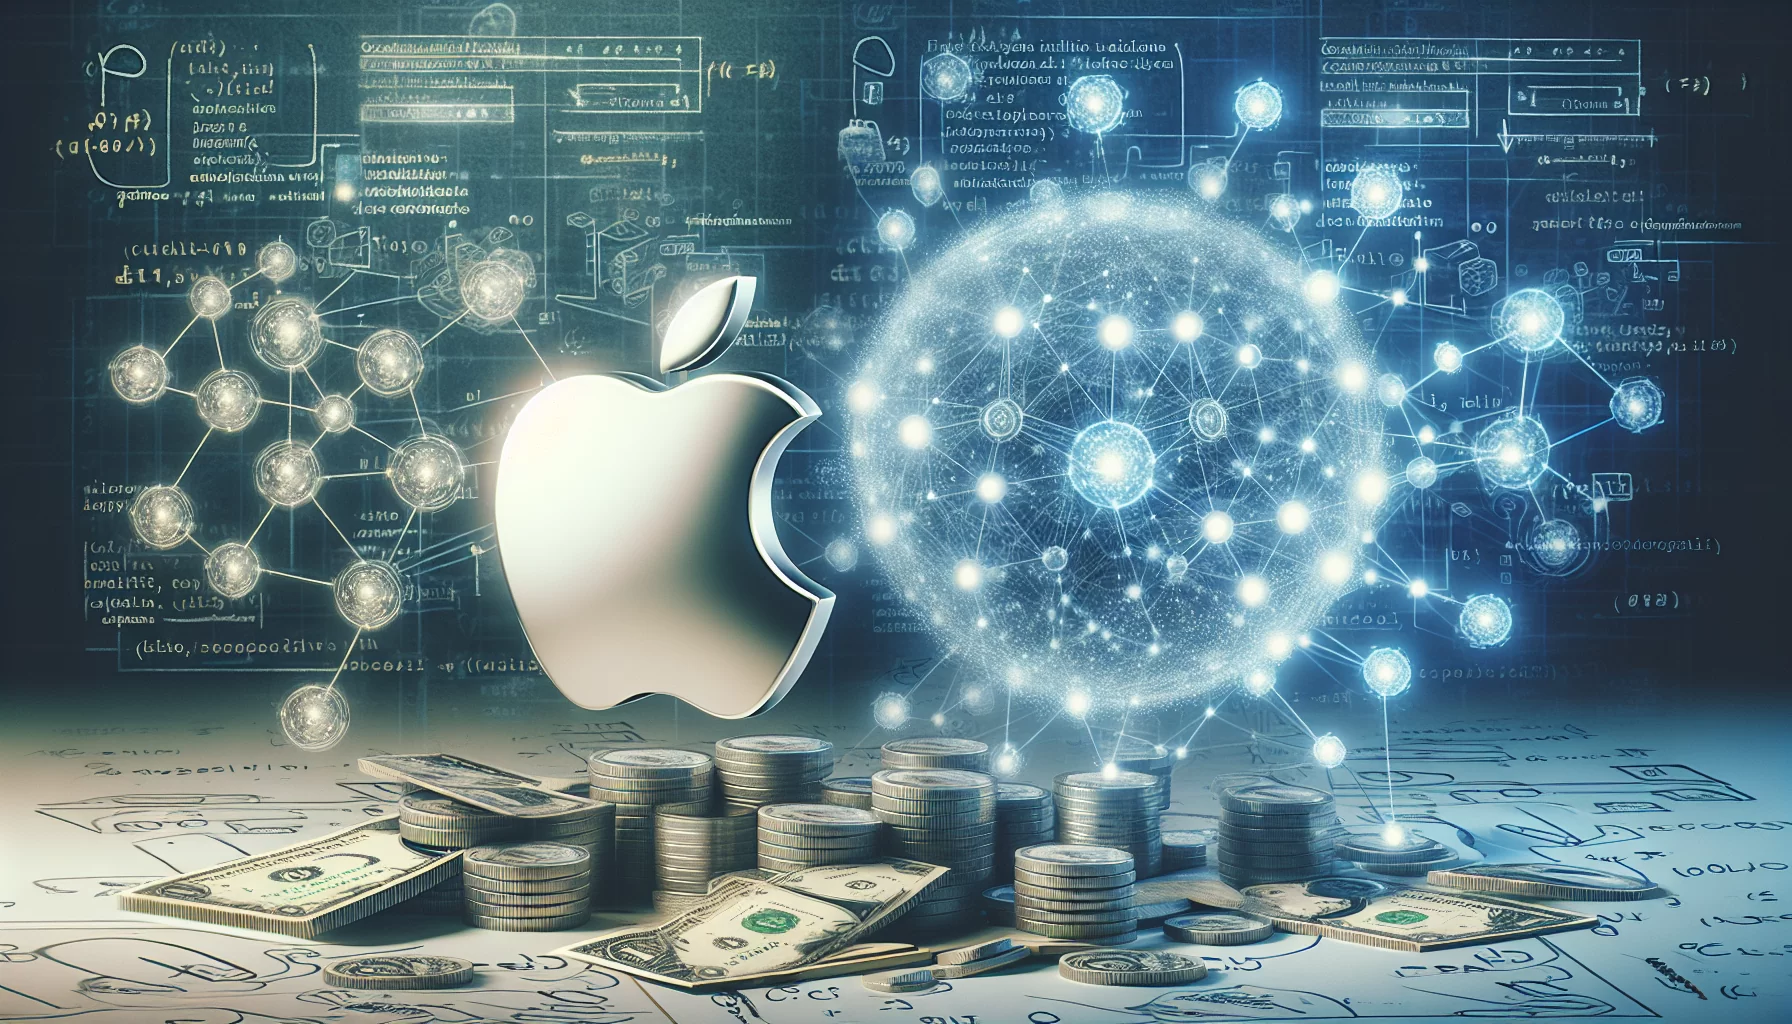 Apple and Singularitynet initiate major funding for digital intelligence projects